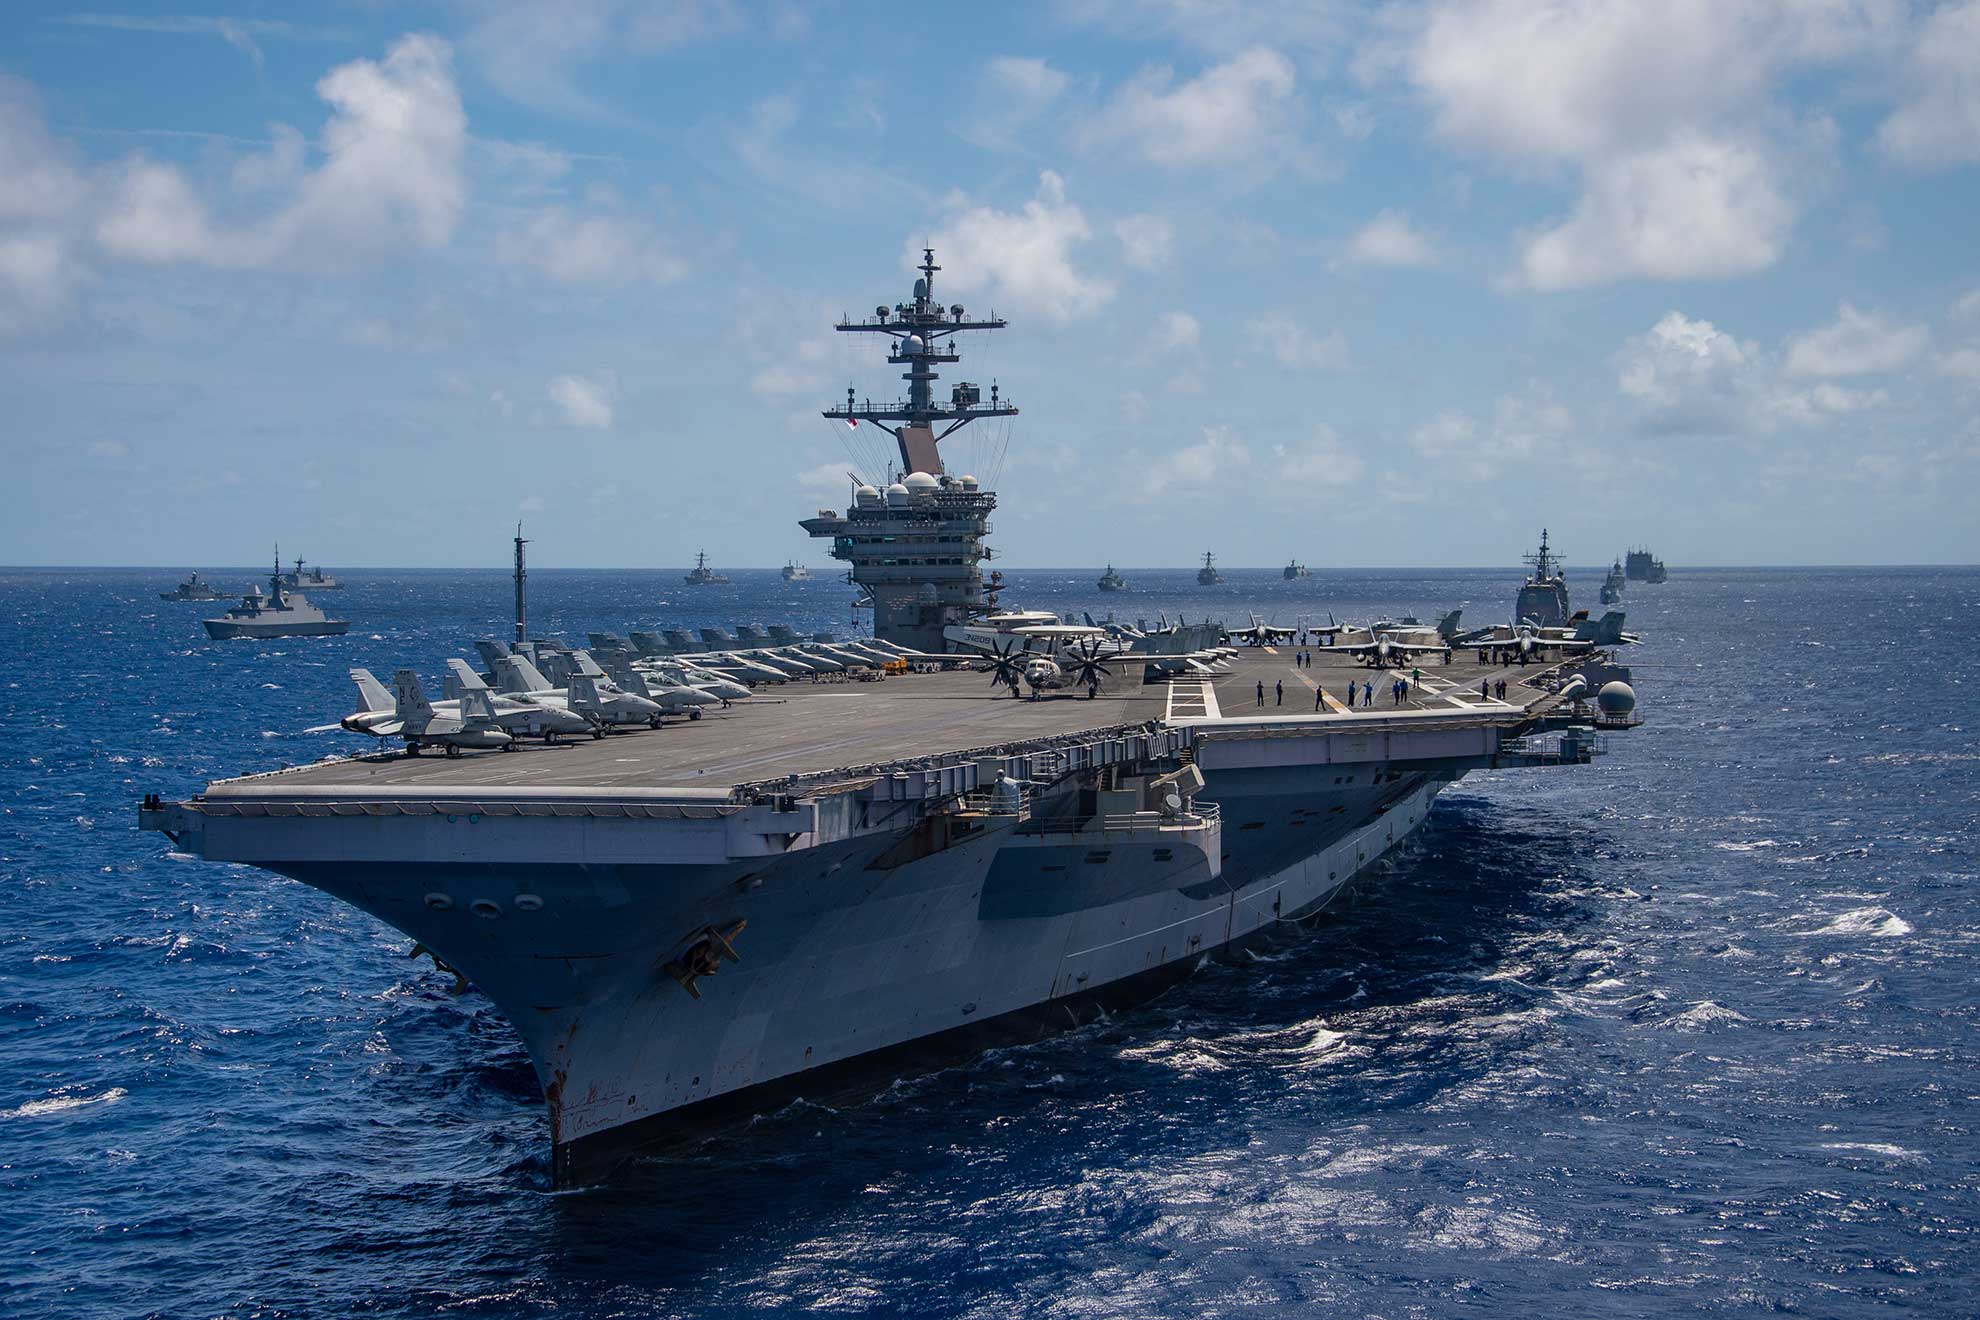 Pacific Ocean (July 26, 2018) The aircraft carrier USS Carl Vinson (CVN 70) participates in a group sail during the Rim of the Pacific (RIMPAC) exercise off the coast of Hawaii, July 26, 2018. Twenty-five nations, 46 ships and five submarines, and about 200 aircraft and 25,000 personnel are participating in RIMPAC from June 27 to Aug. 2 in and around the Hawaiian Islands and Southern California. The world's largest international maritime exercise, RIMPAC provides a unique training opportunity while fostering and sustaining cooperative relationships among participants critical to ensuring the safety of sea lanes and security of the world's oceans. RIMPAC 2018 is the 26th exercise in the series that began in 1971 -- U.S. Navy photo by MCS1 Arthurgwain L. Marquez. -